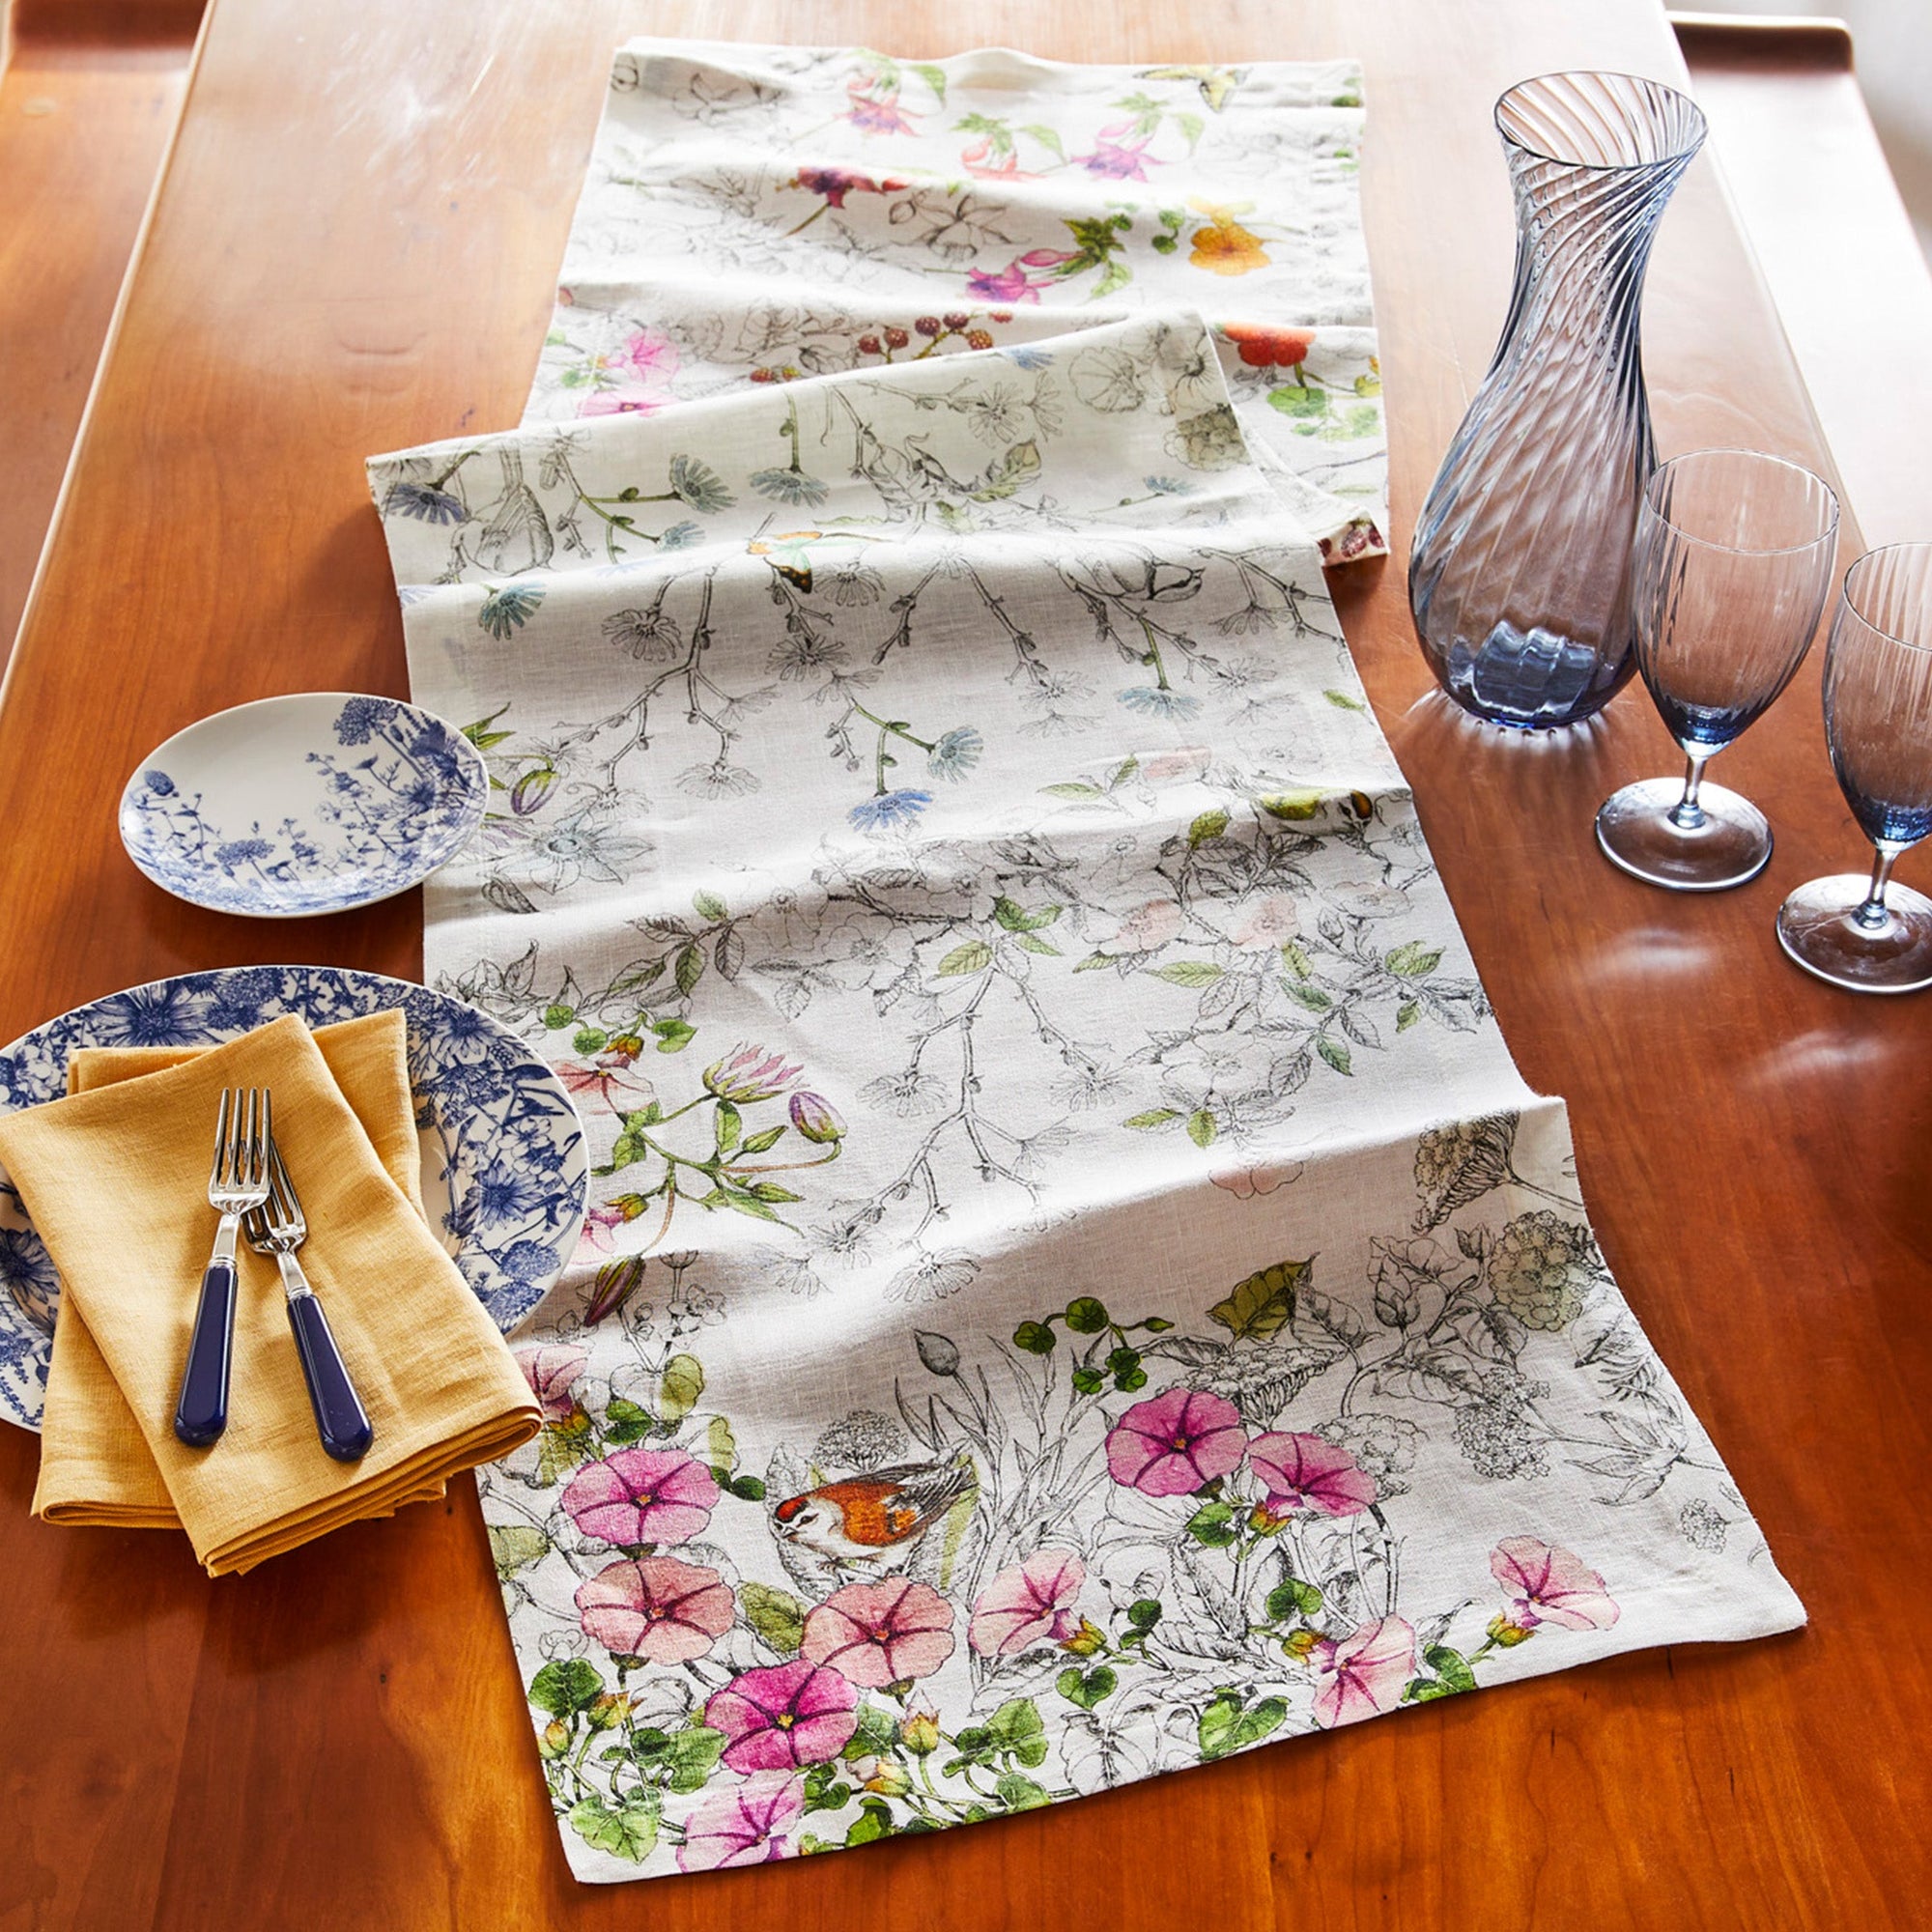 Nasturtium Print Tablecloth Runner in black and white with colored florals, birds and butterflies on Italian linen from Caskata